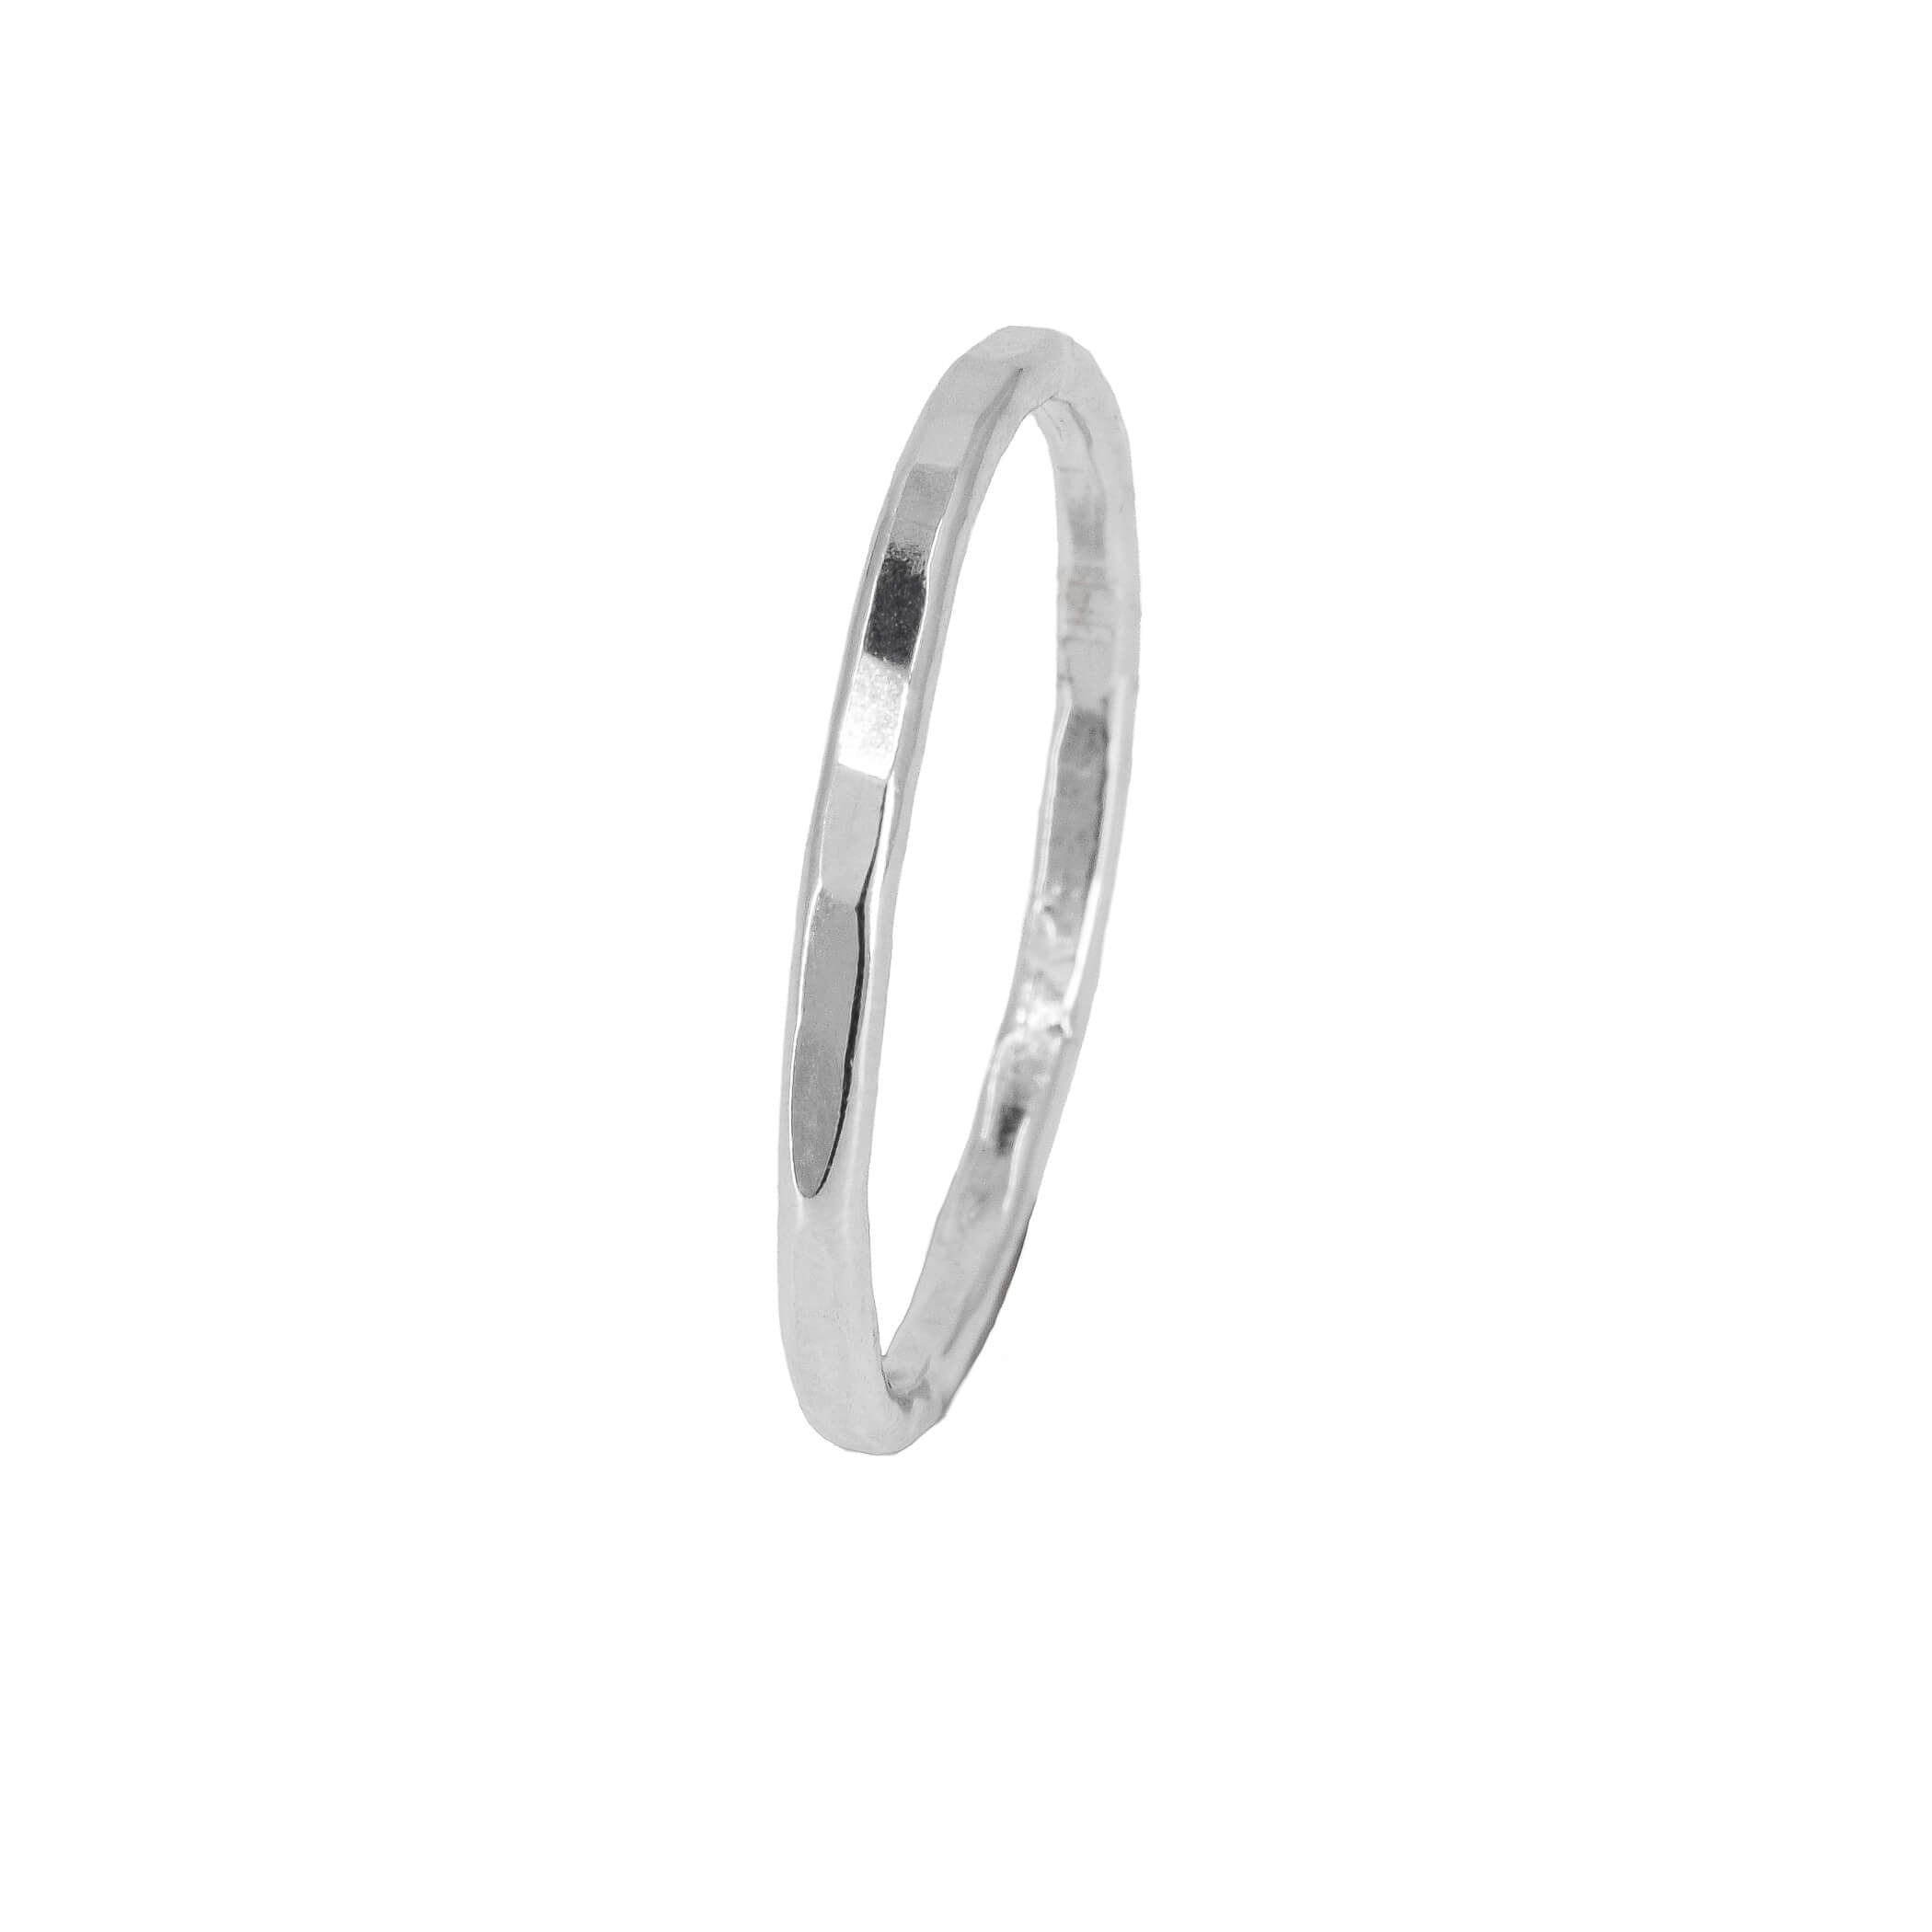 Thin faceted sterling silver stacking ring